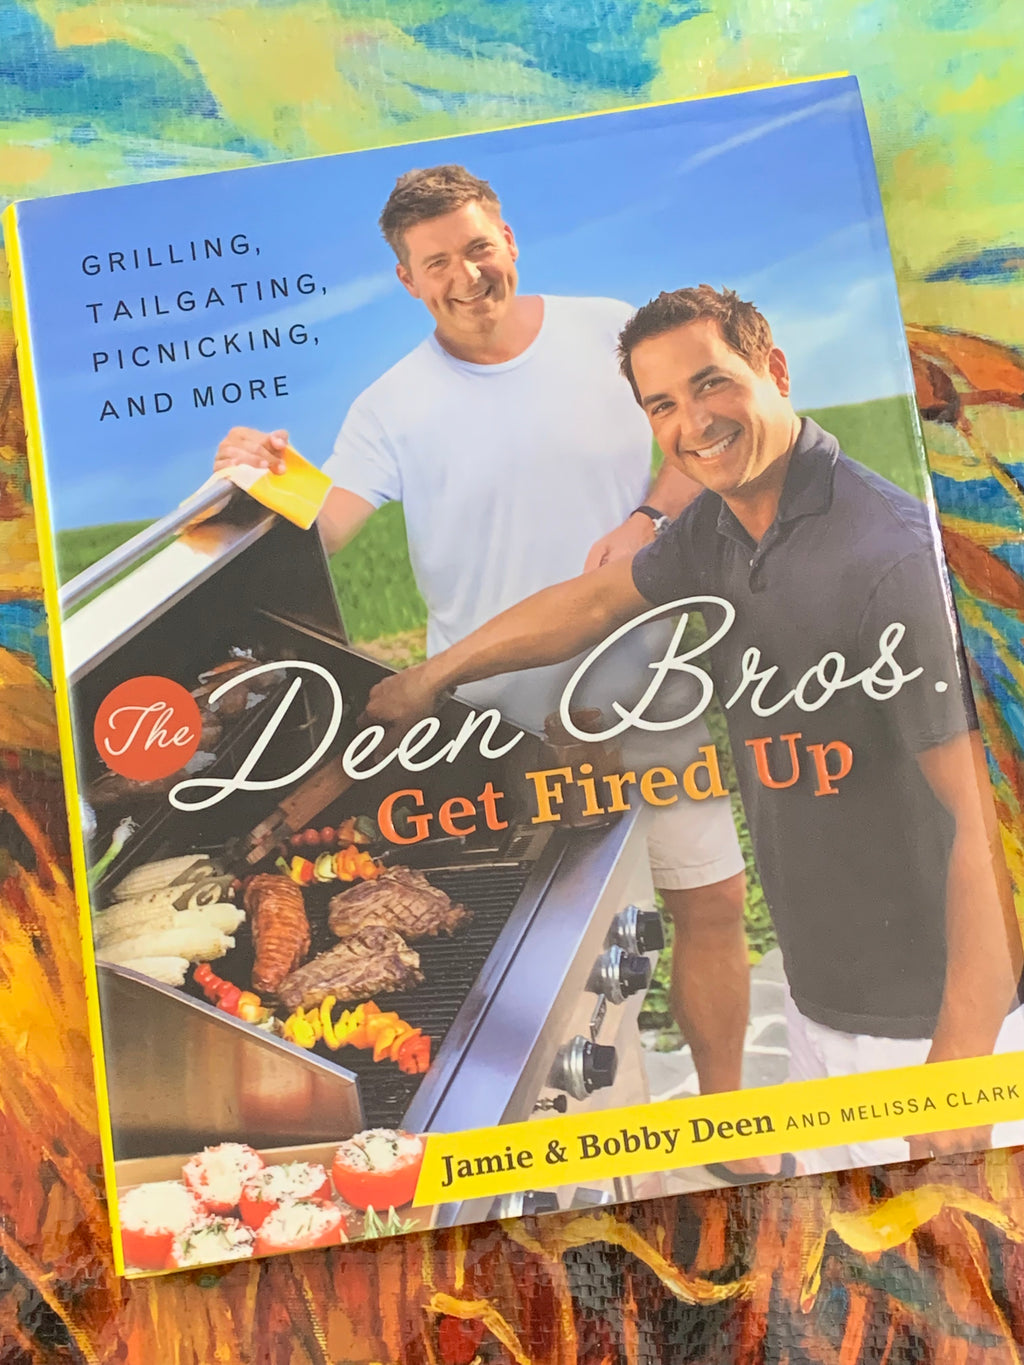 The Dean Bros. Get Fired Up- By Jamie & Bobby Deen *Signed Copy